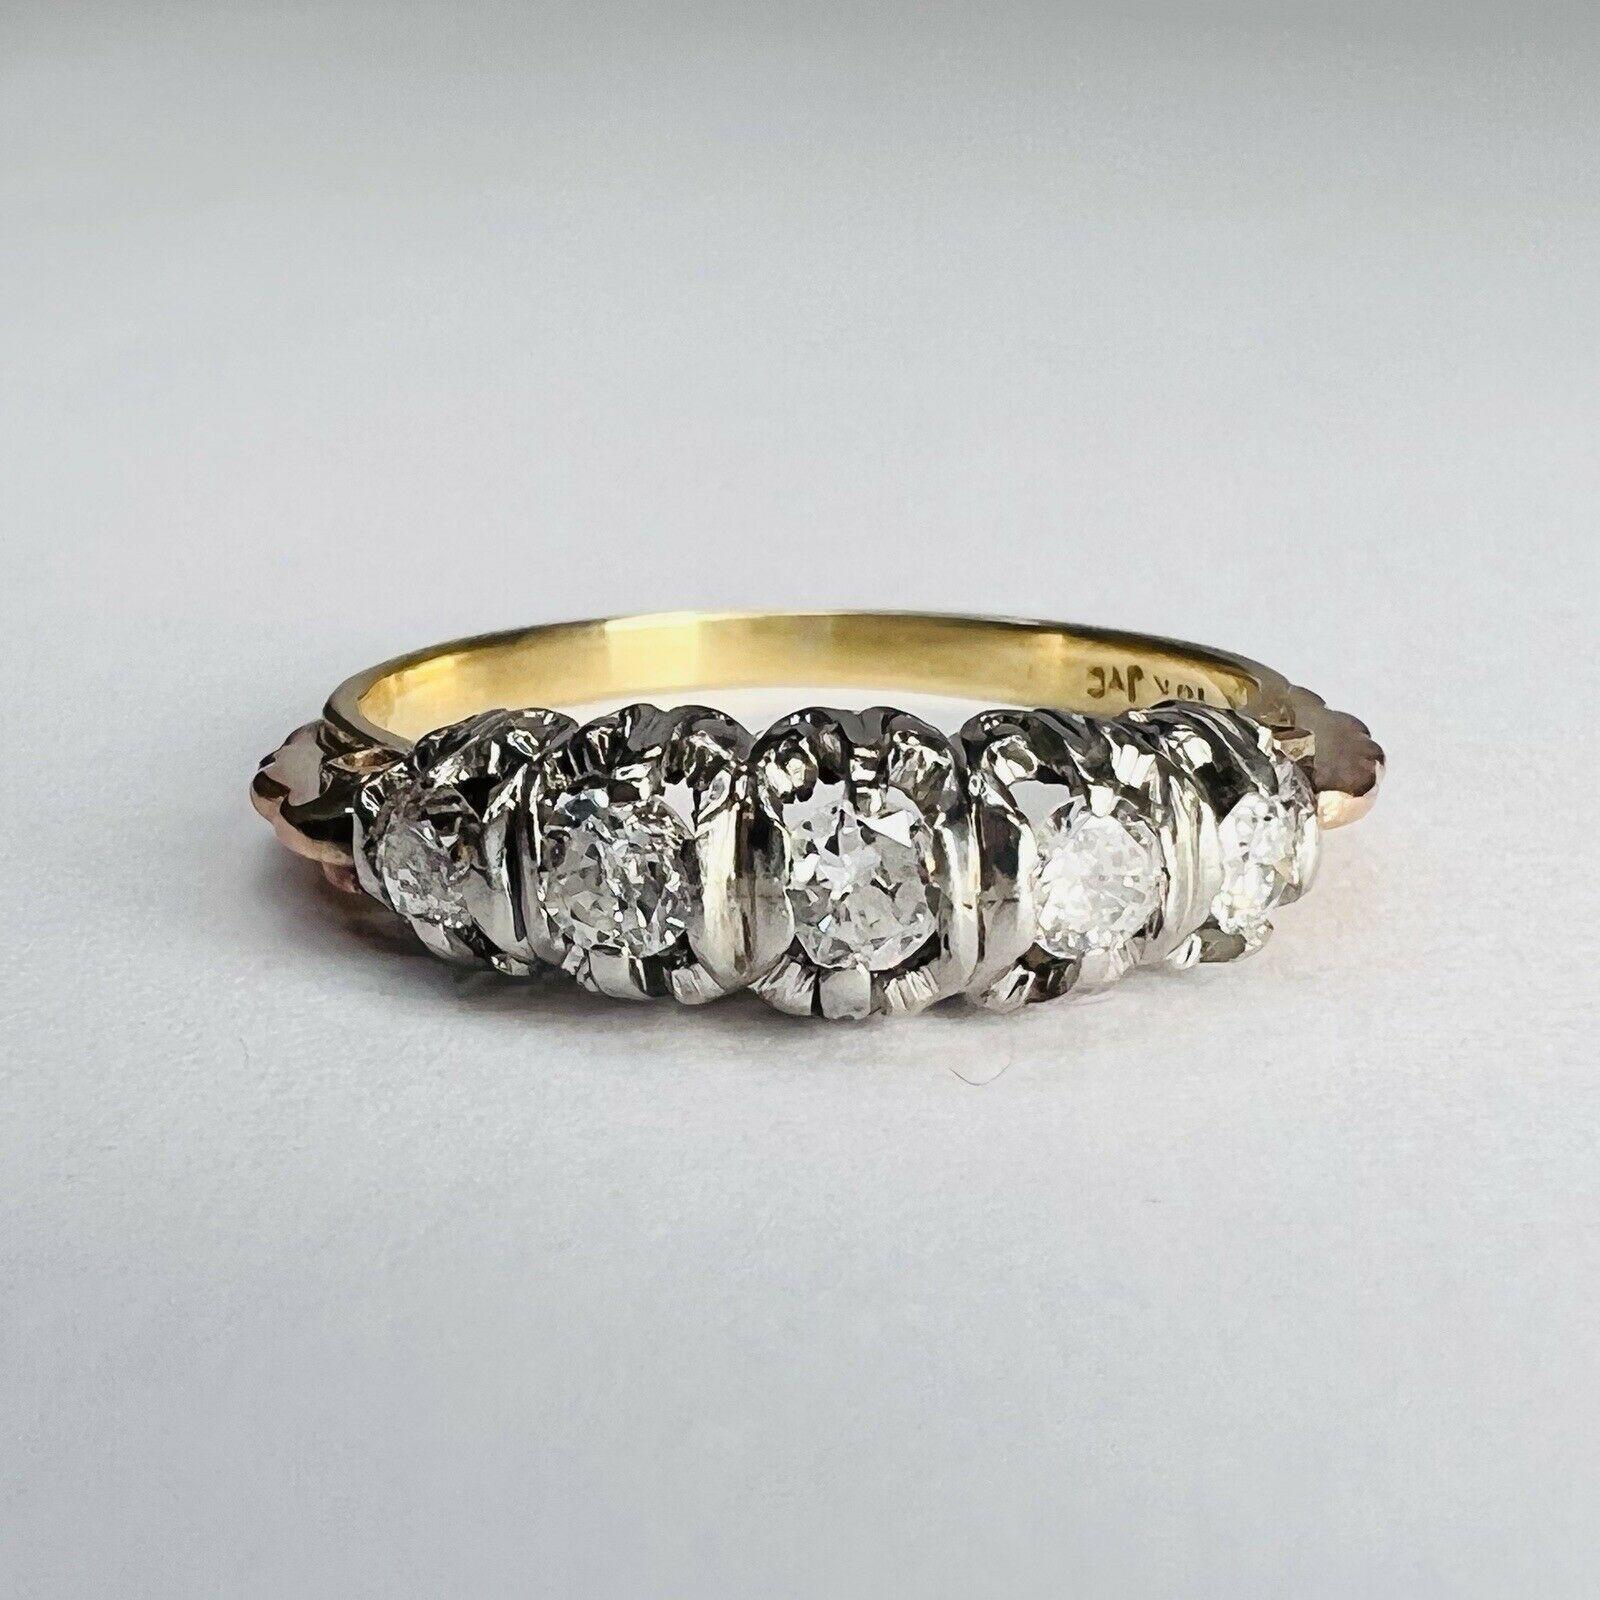 Presenting A:

Solid 18K Yellow Gold and Platinum set Diamond Edwardian Ring Band Size 6.75

There are natural diamonds prong set in platinum on a 18K Yellow gold ring band 

The diamonds are natural and earth mined about .50CTW

The Ring is 4mm